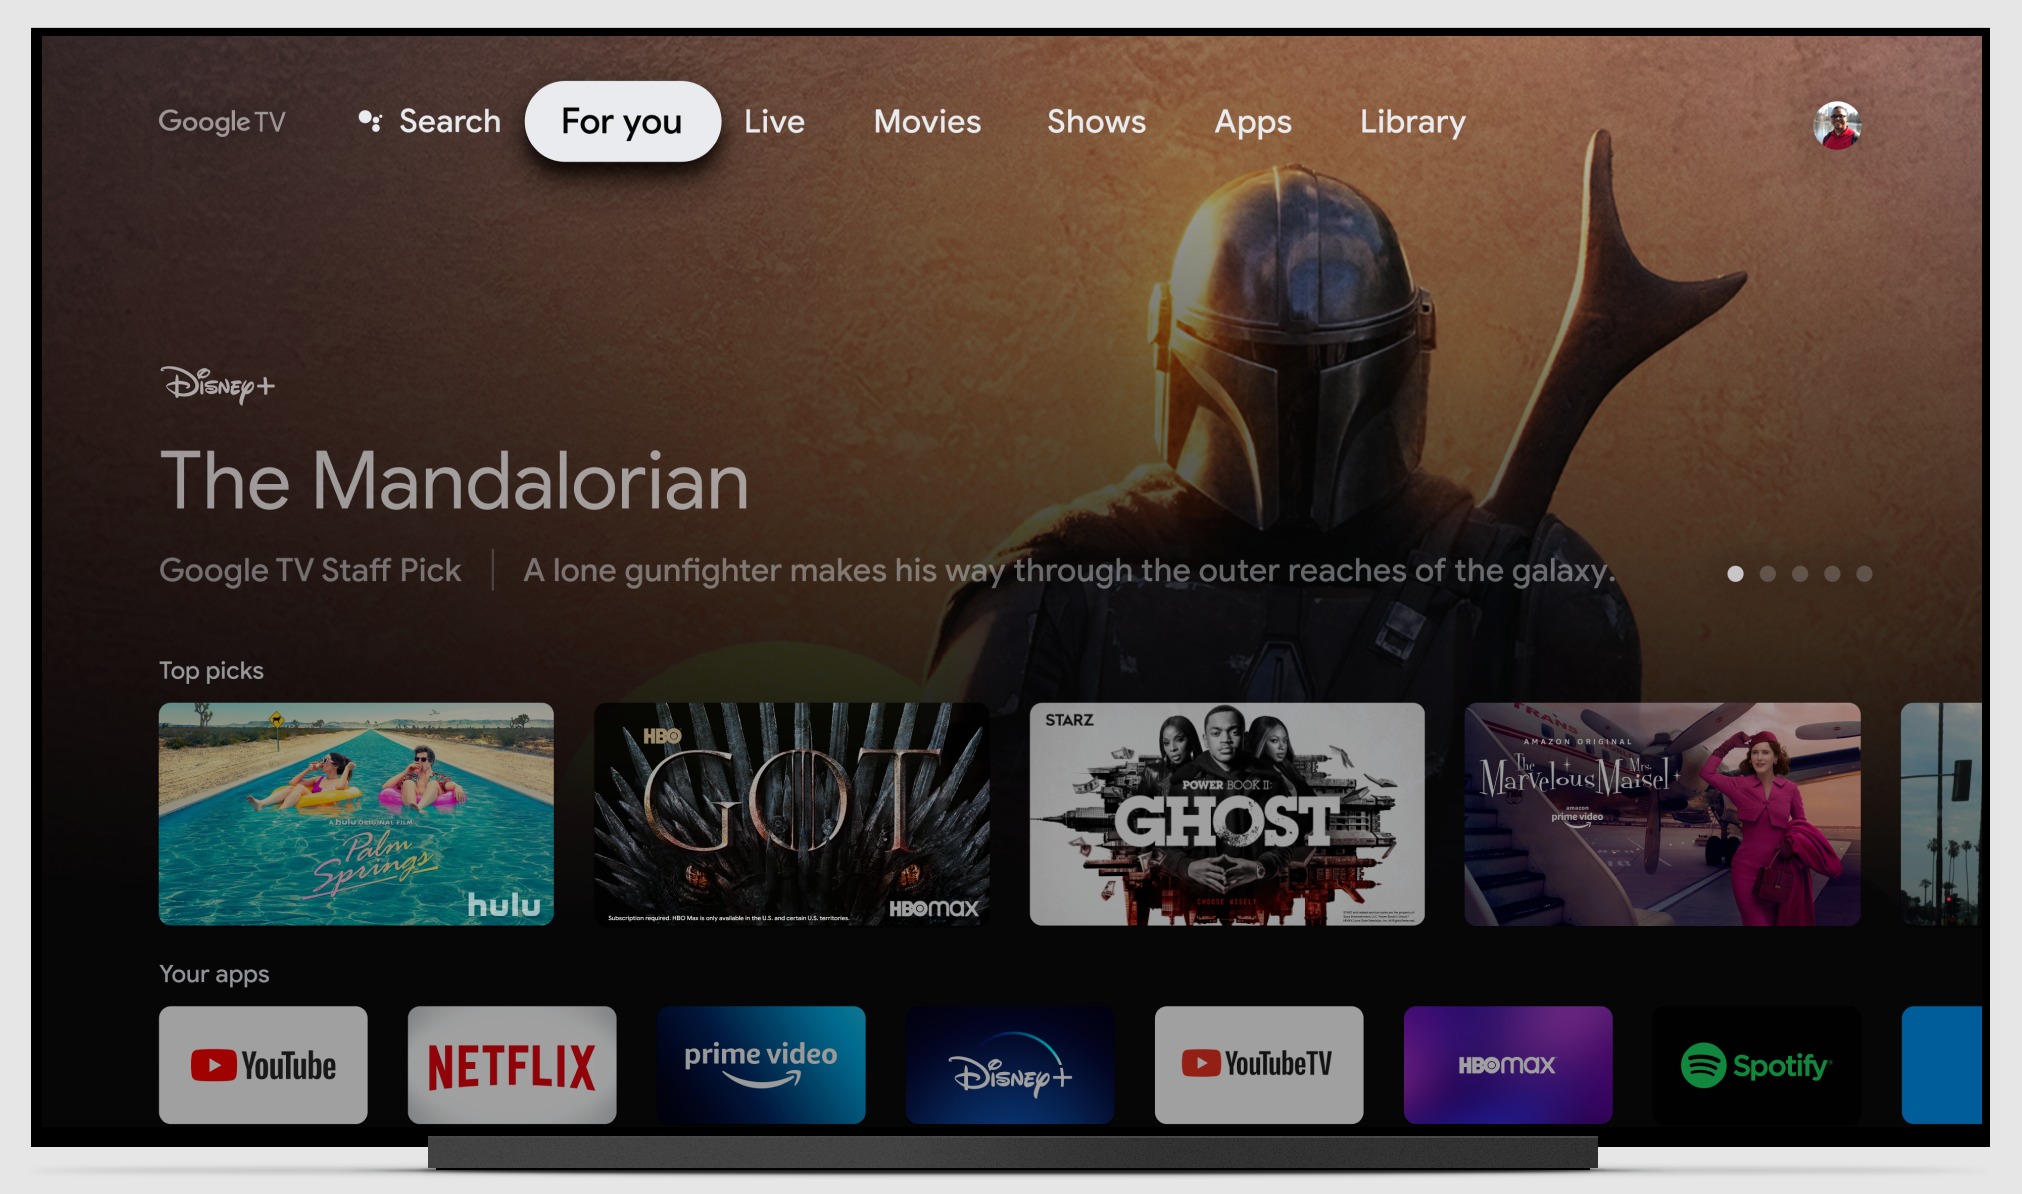 google tv for you tab